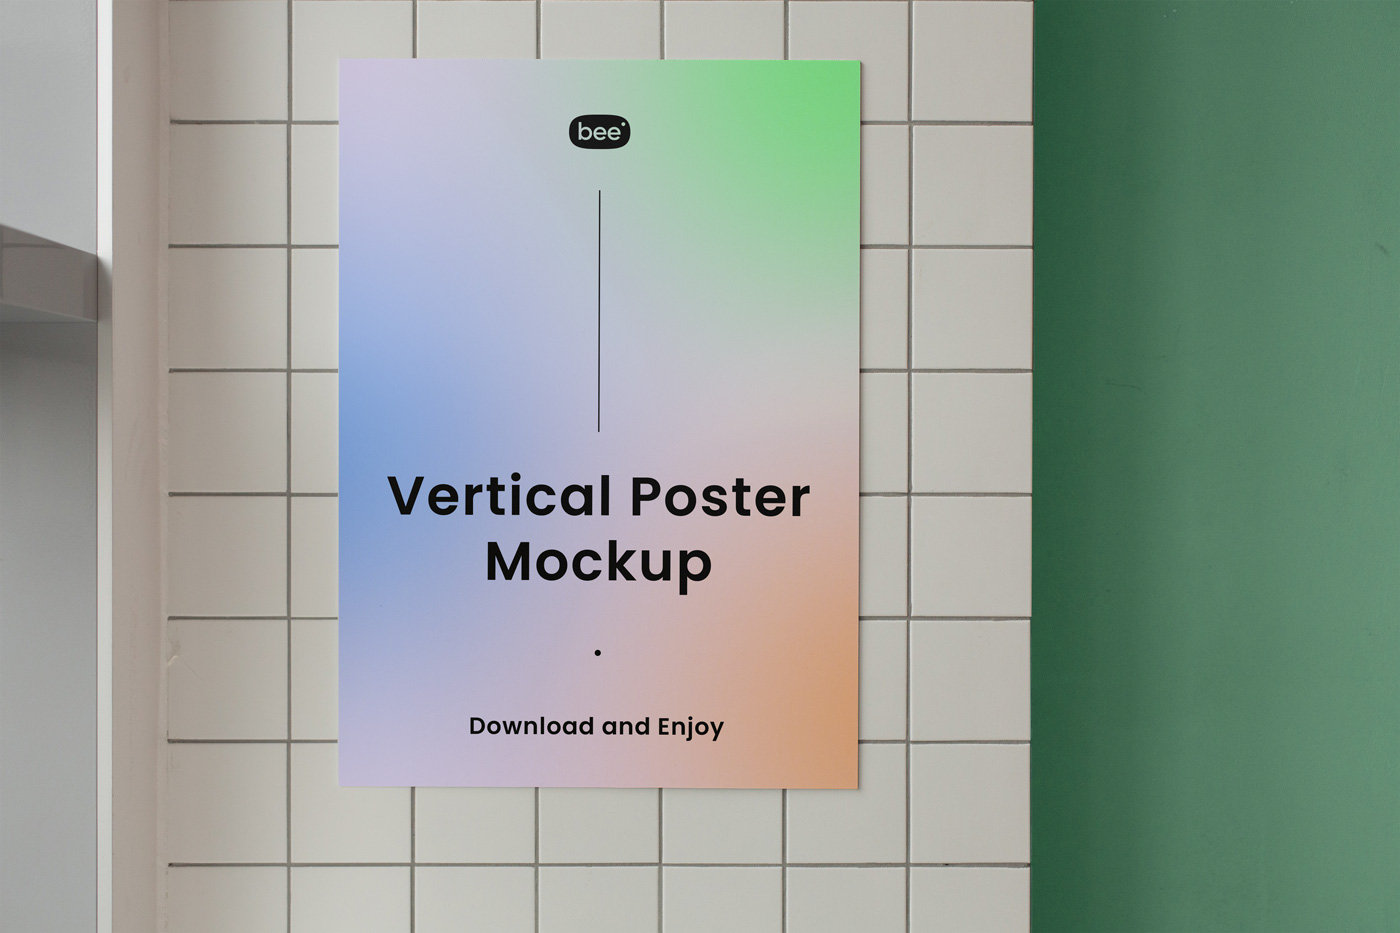 Front View of Vertical Poster Mockup on Wall